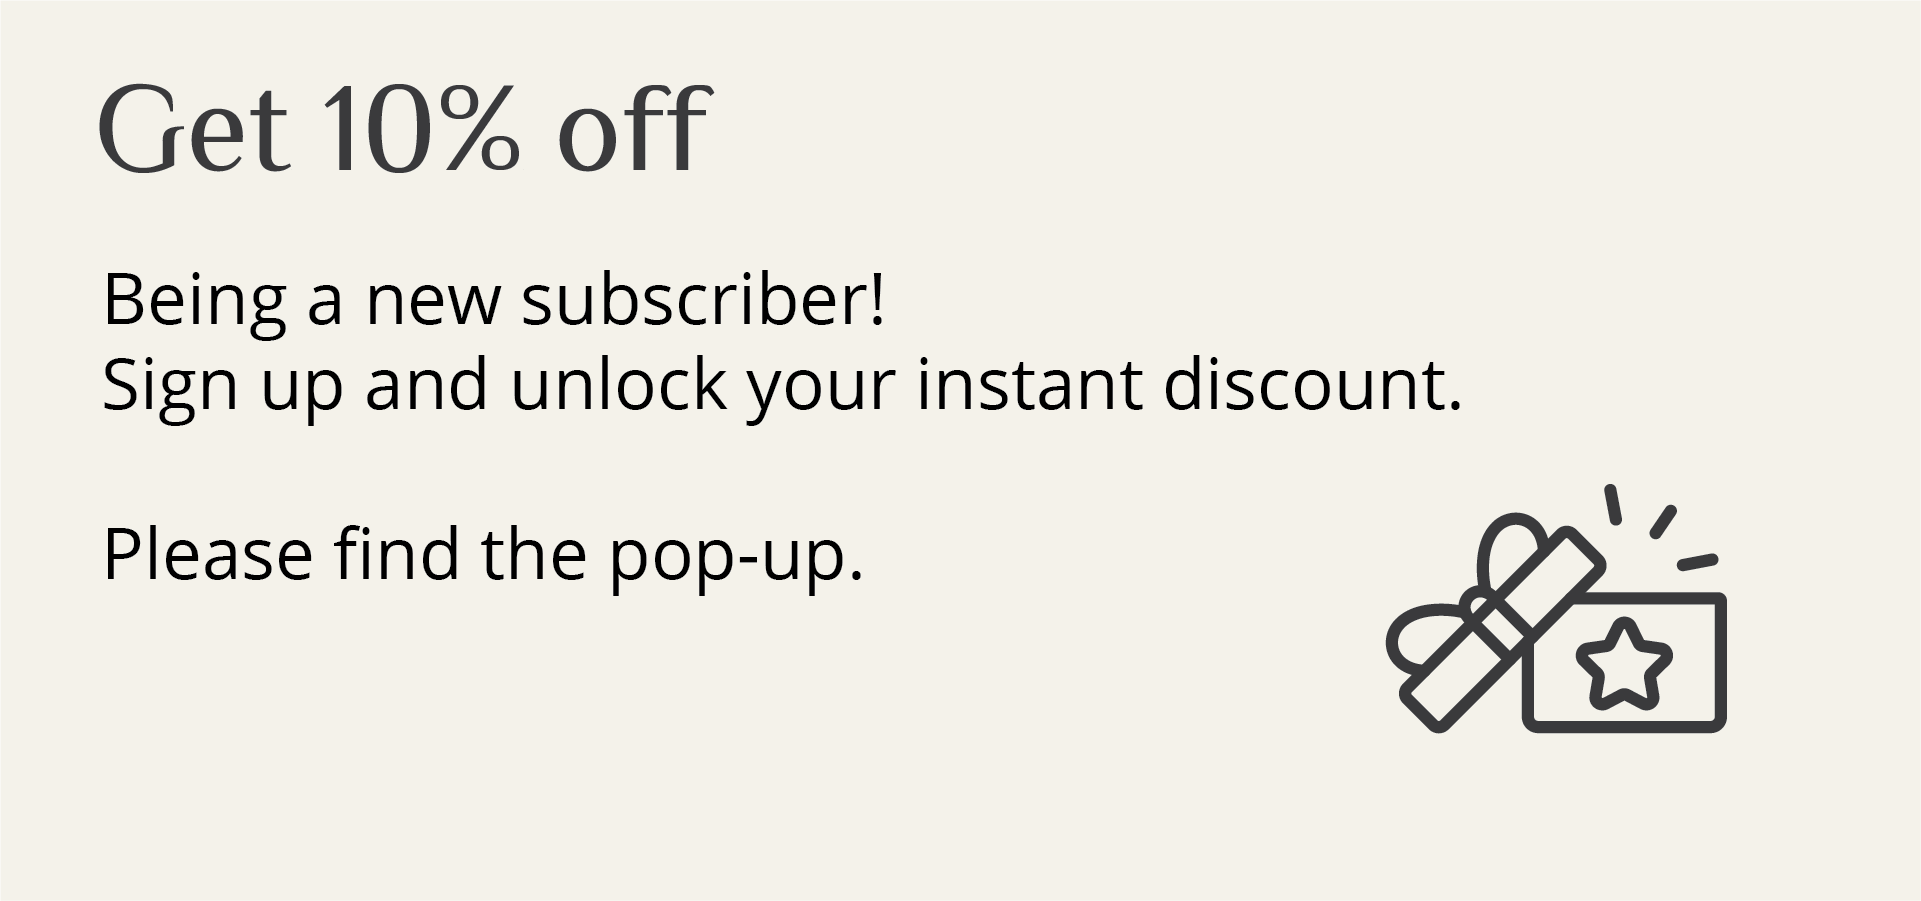 get 10% off, beaing a new subscriver! sign up and unlock your instant disocunt.